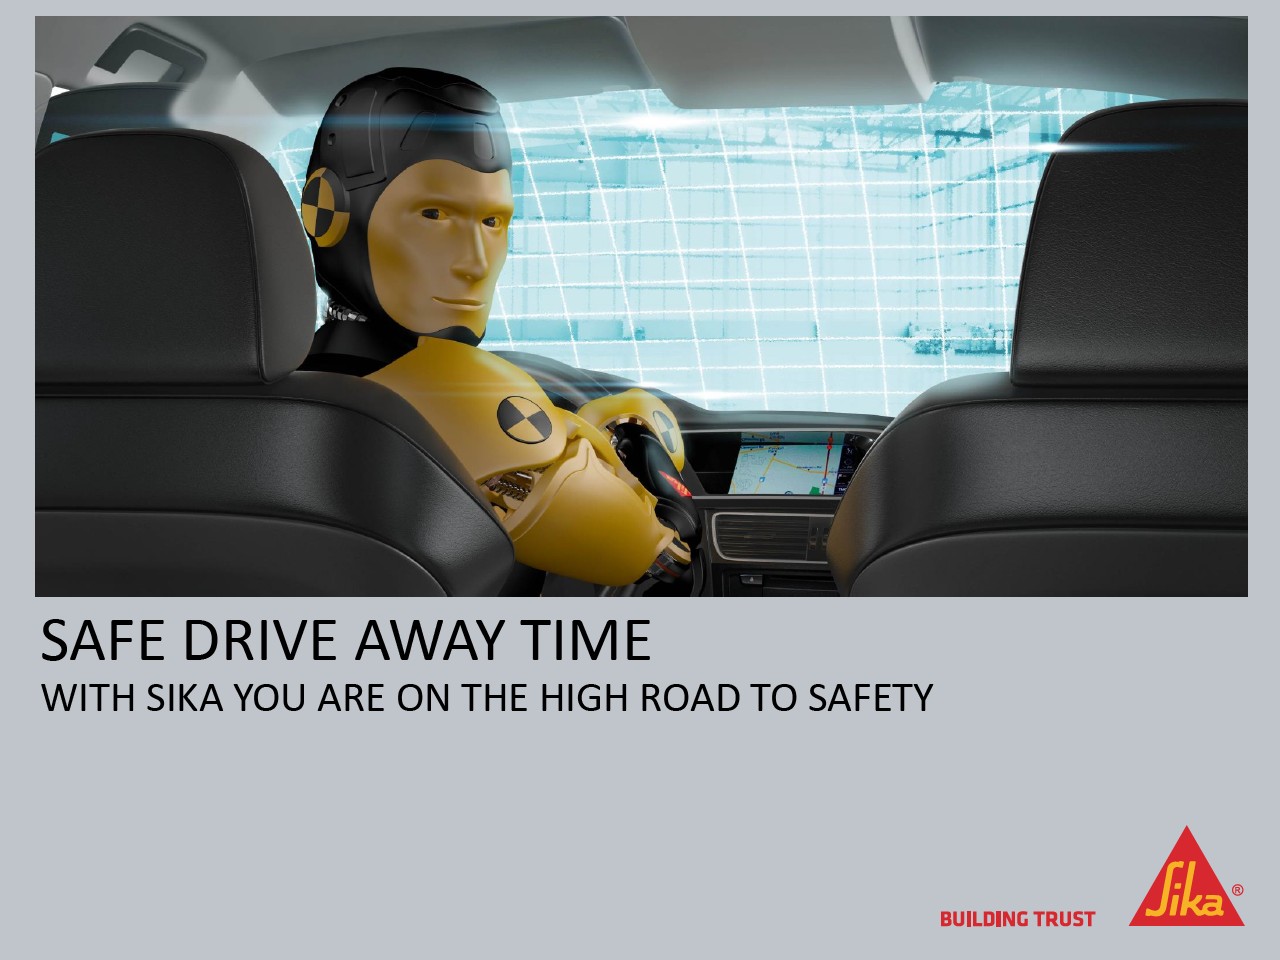 Safe Drive Away Time With Sika you are on the high road to Safety